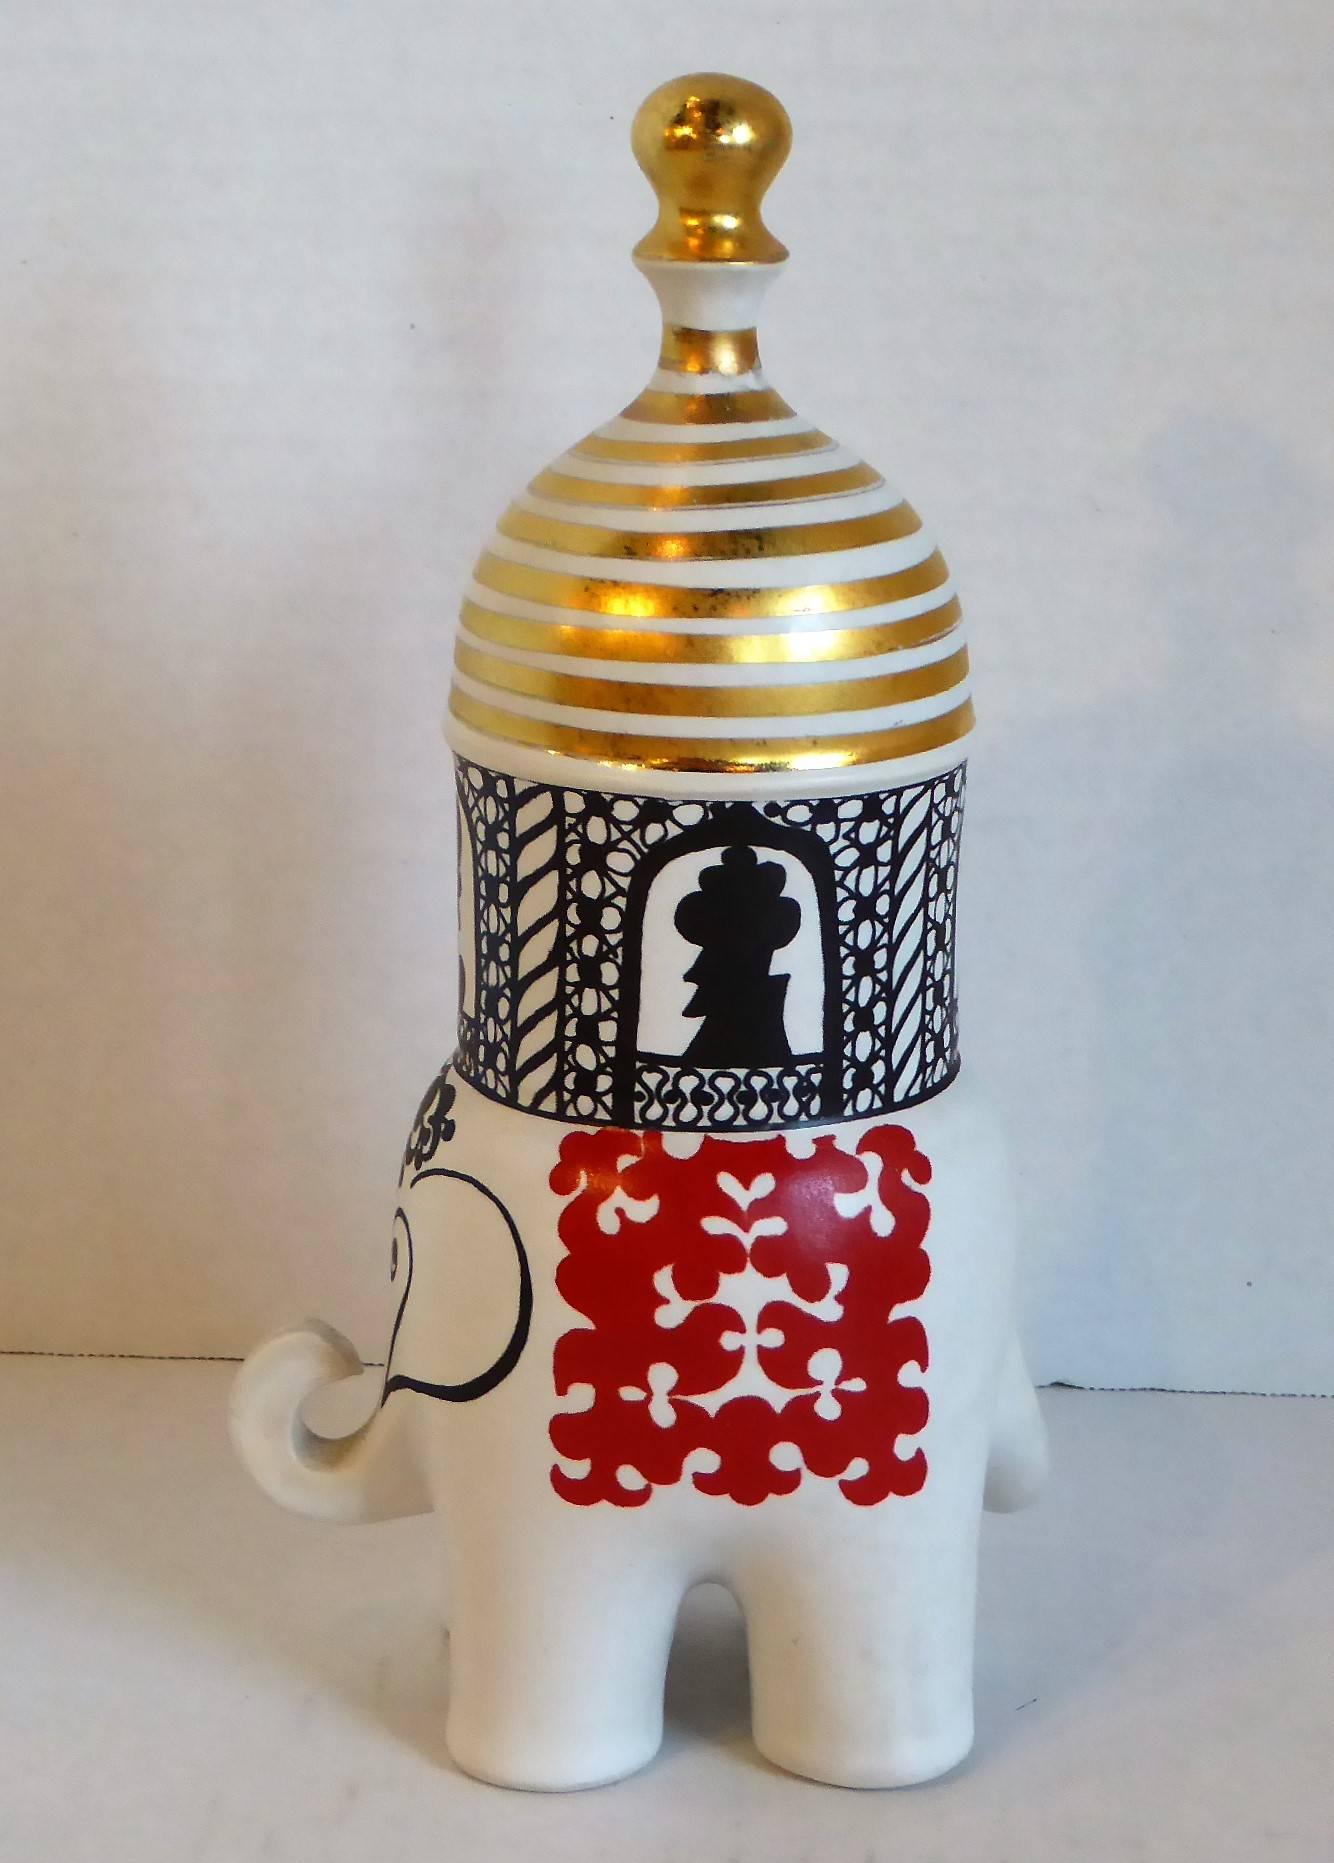 From noted Swedish artist Lisa Larson (b. 1931) for Gustavsberg, a rare 46 year old find from her Traffic Series in 1970. Here, the "Elephant" with the Maharajah riding in the domed cabin. Elegant in white stoneware with red and black